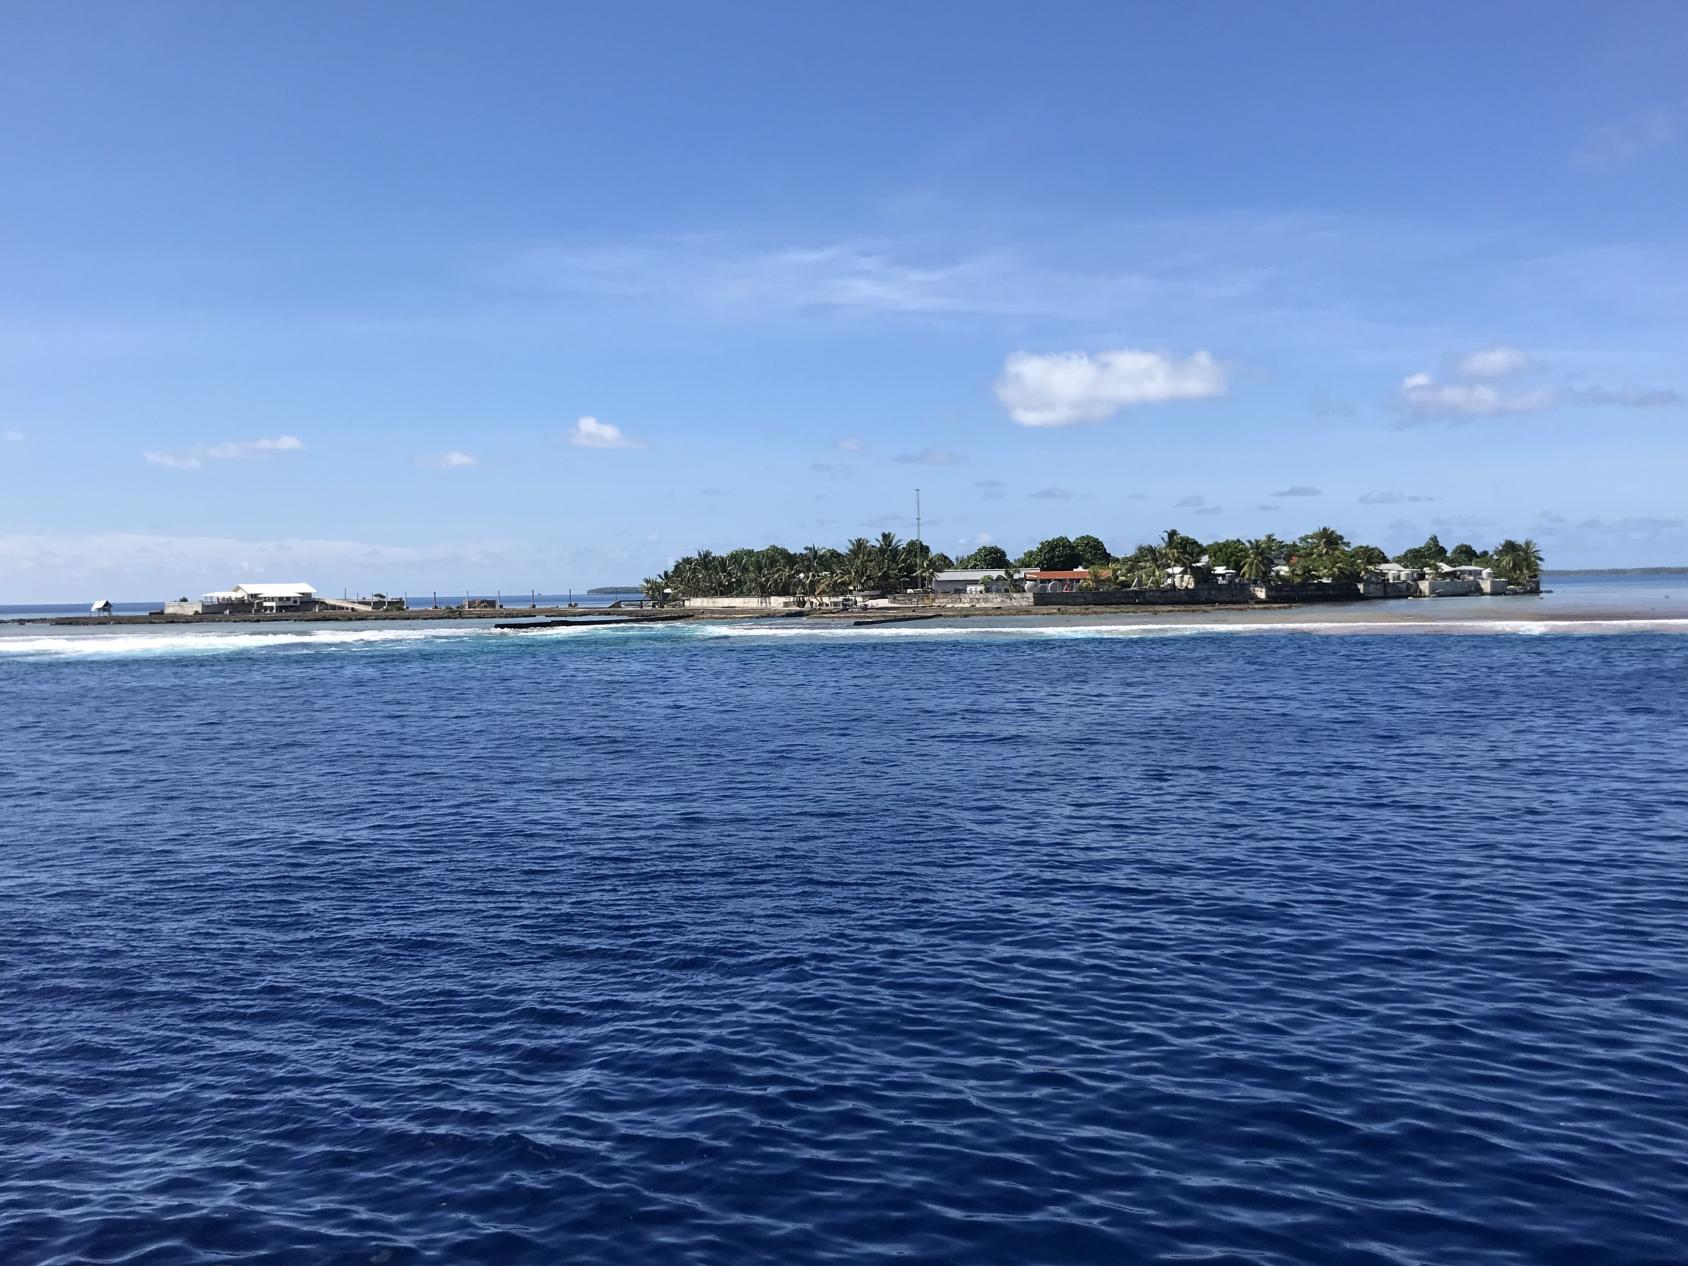 A landscape view of a small island nation where homes and commerce visible from the ocean. 